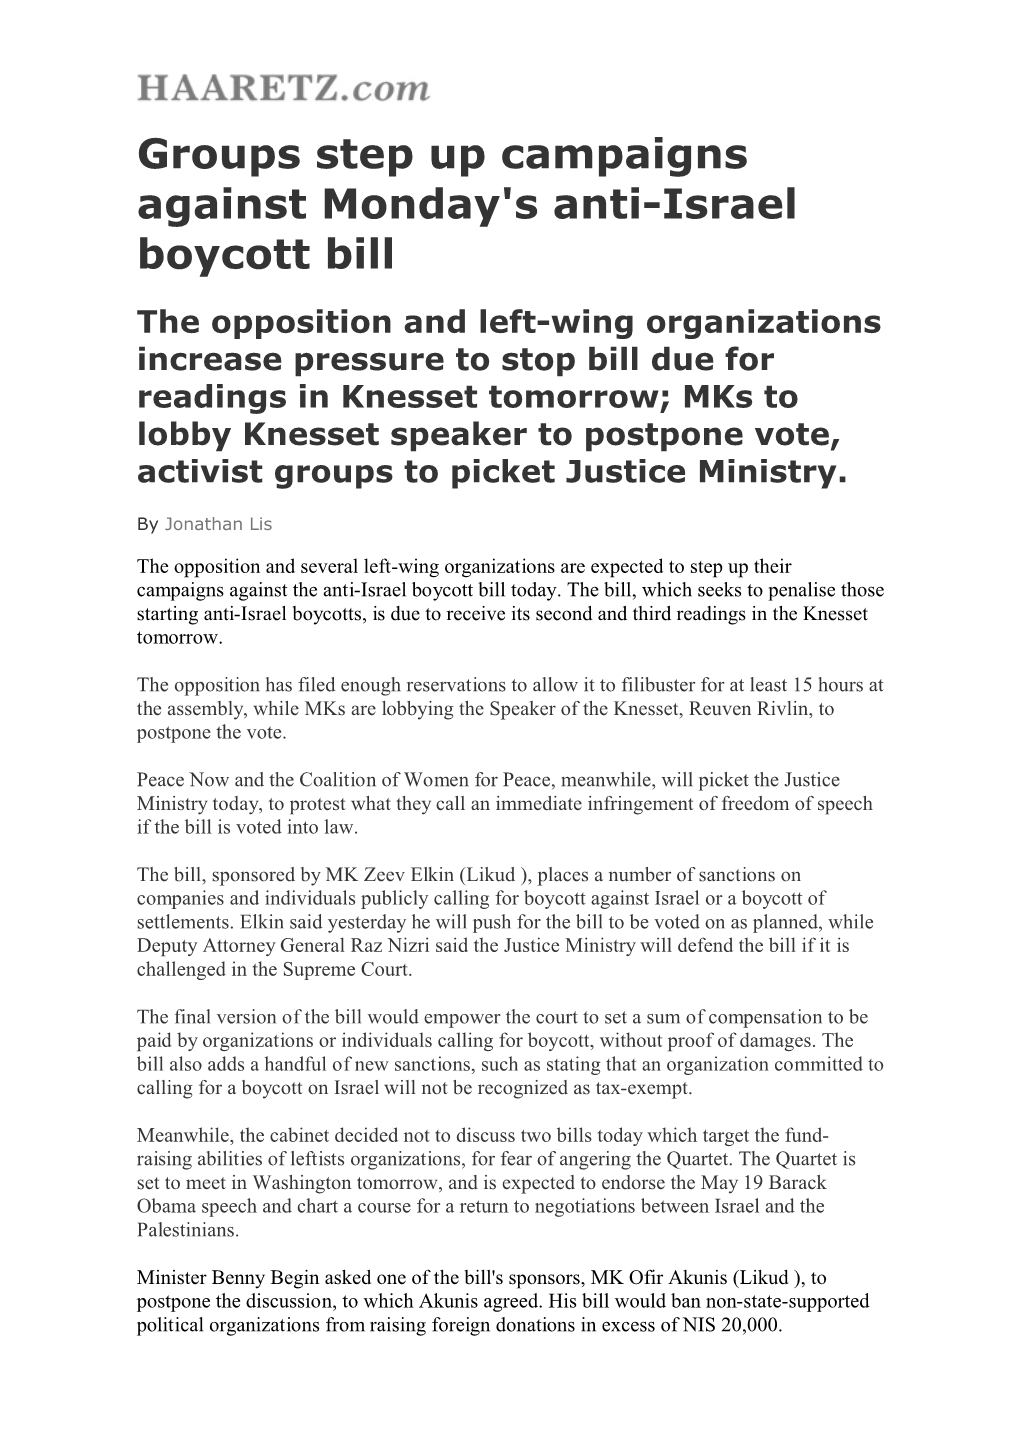 Groups Step up Campaigns Against Monday's Anti-Israel Boycott Bill